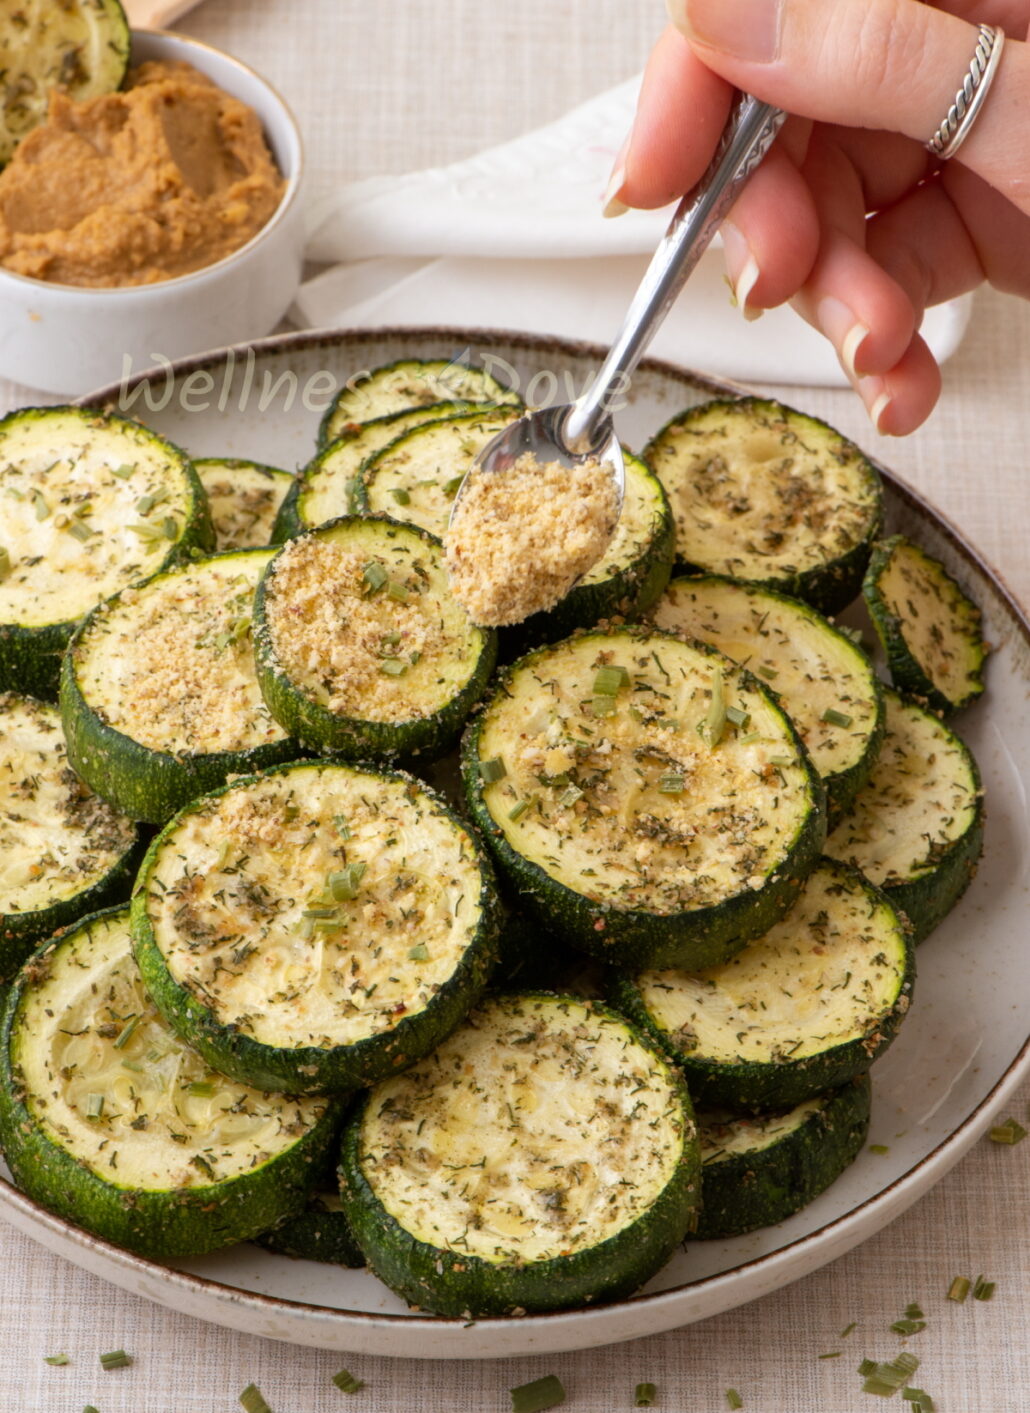 A plate full of roasted zucchini and a hand is sprinkling vegan parmesan over them